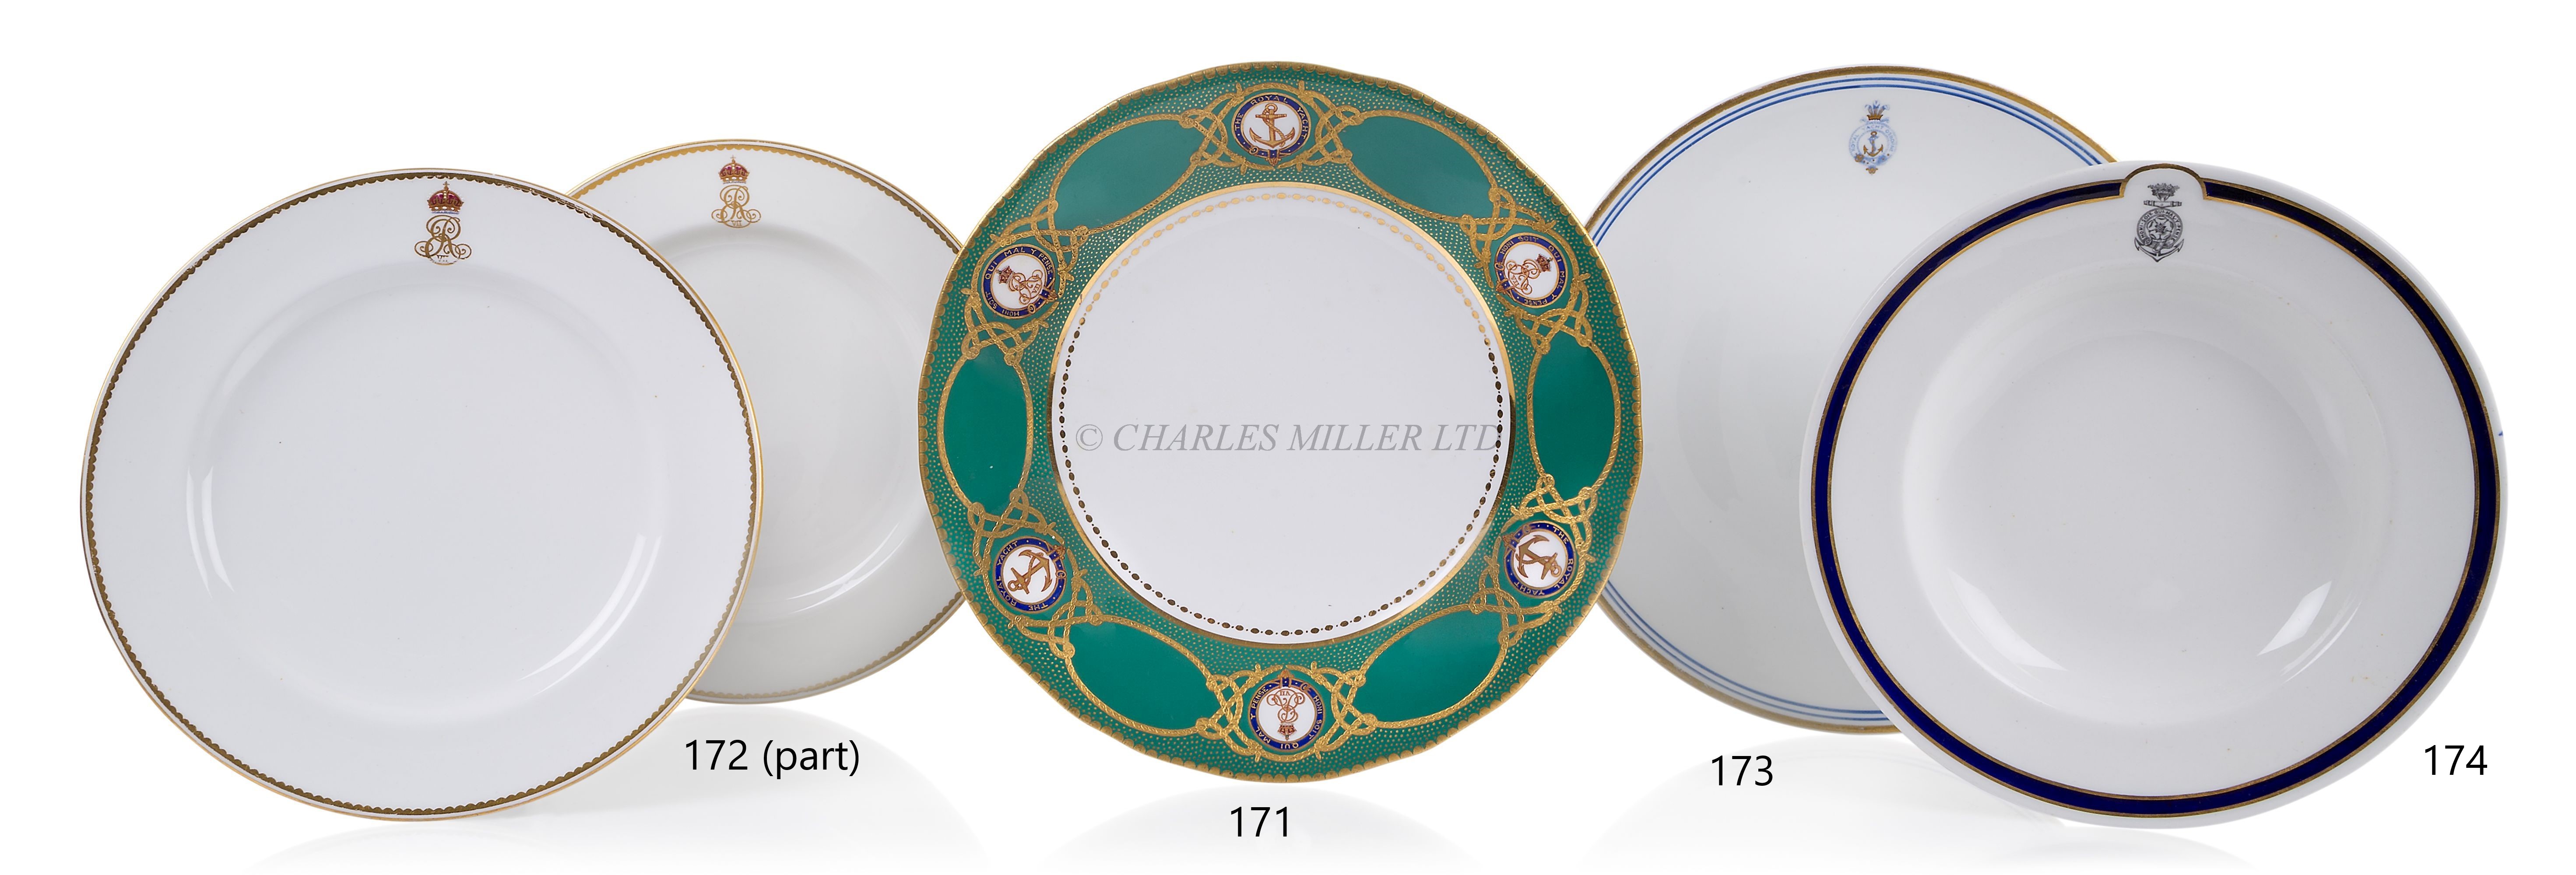 A SUPPER PLATE FROM THE R.Y. OSBORNE, CIRCA 1880